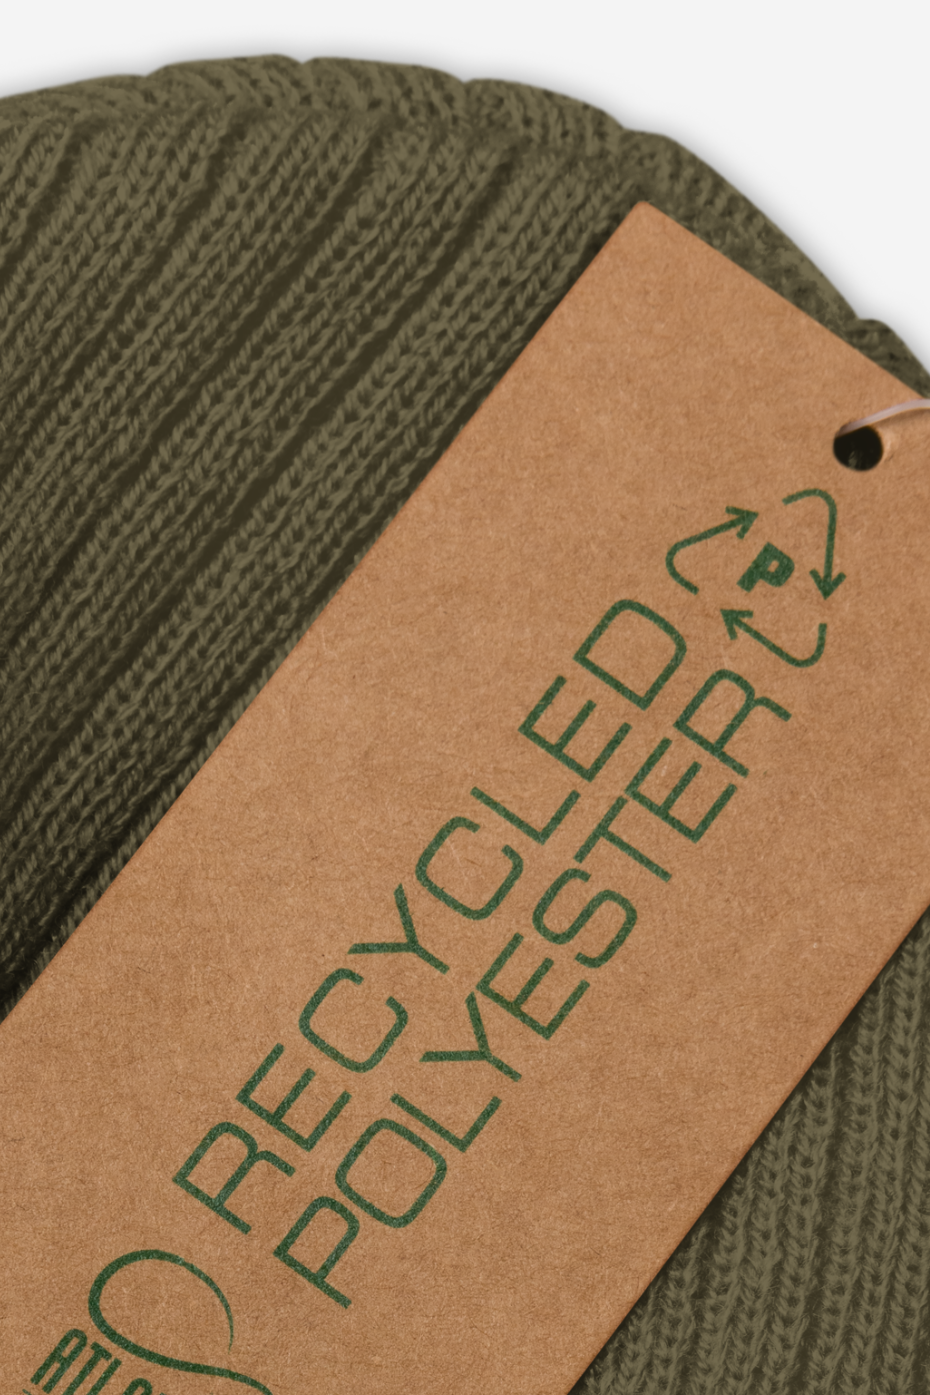 Meat Free Recycled Ribbed knit beanie